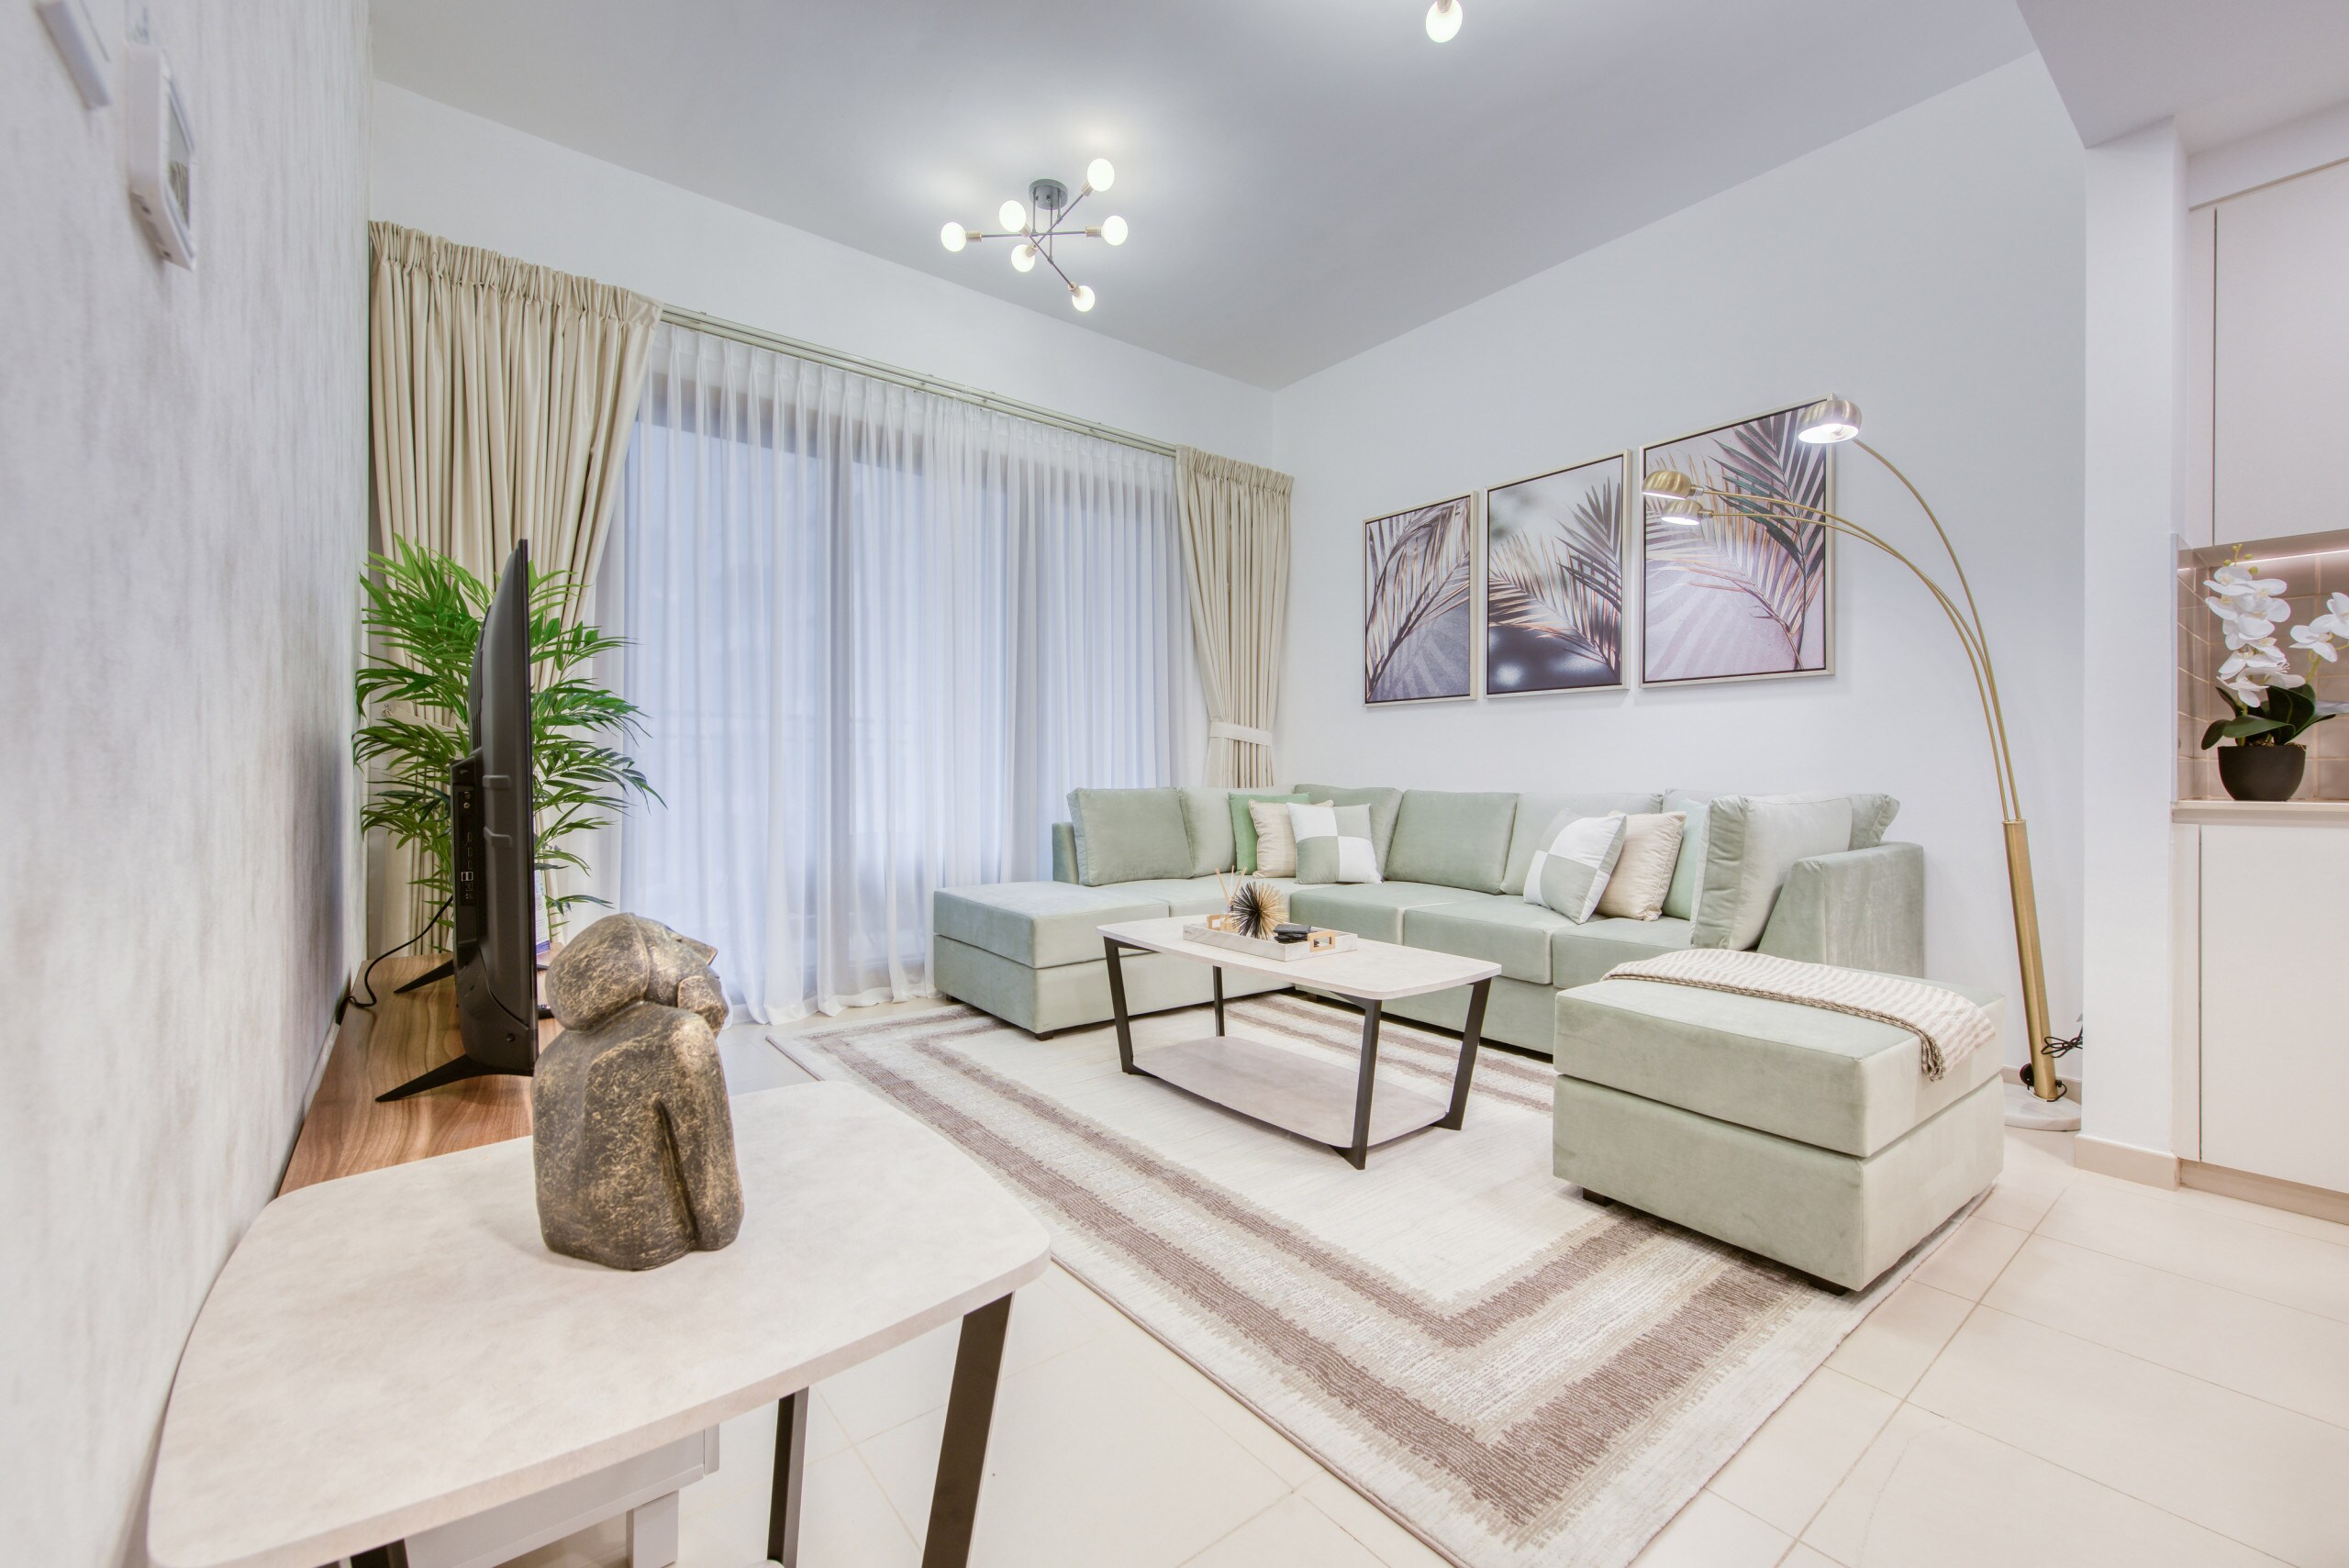 Property Image 1 - Exquisite 2BR at Zahra Breeze Dubailand by Property Manager